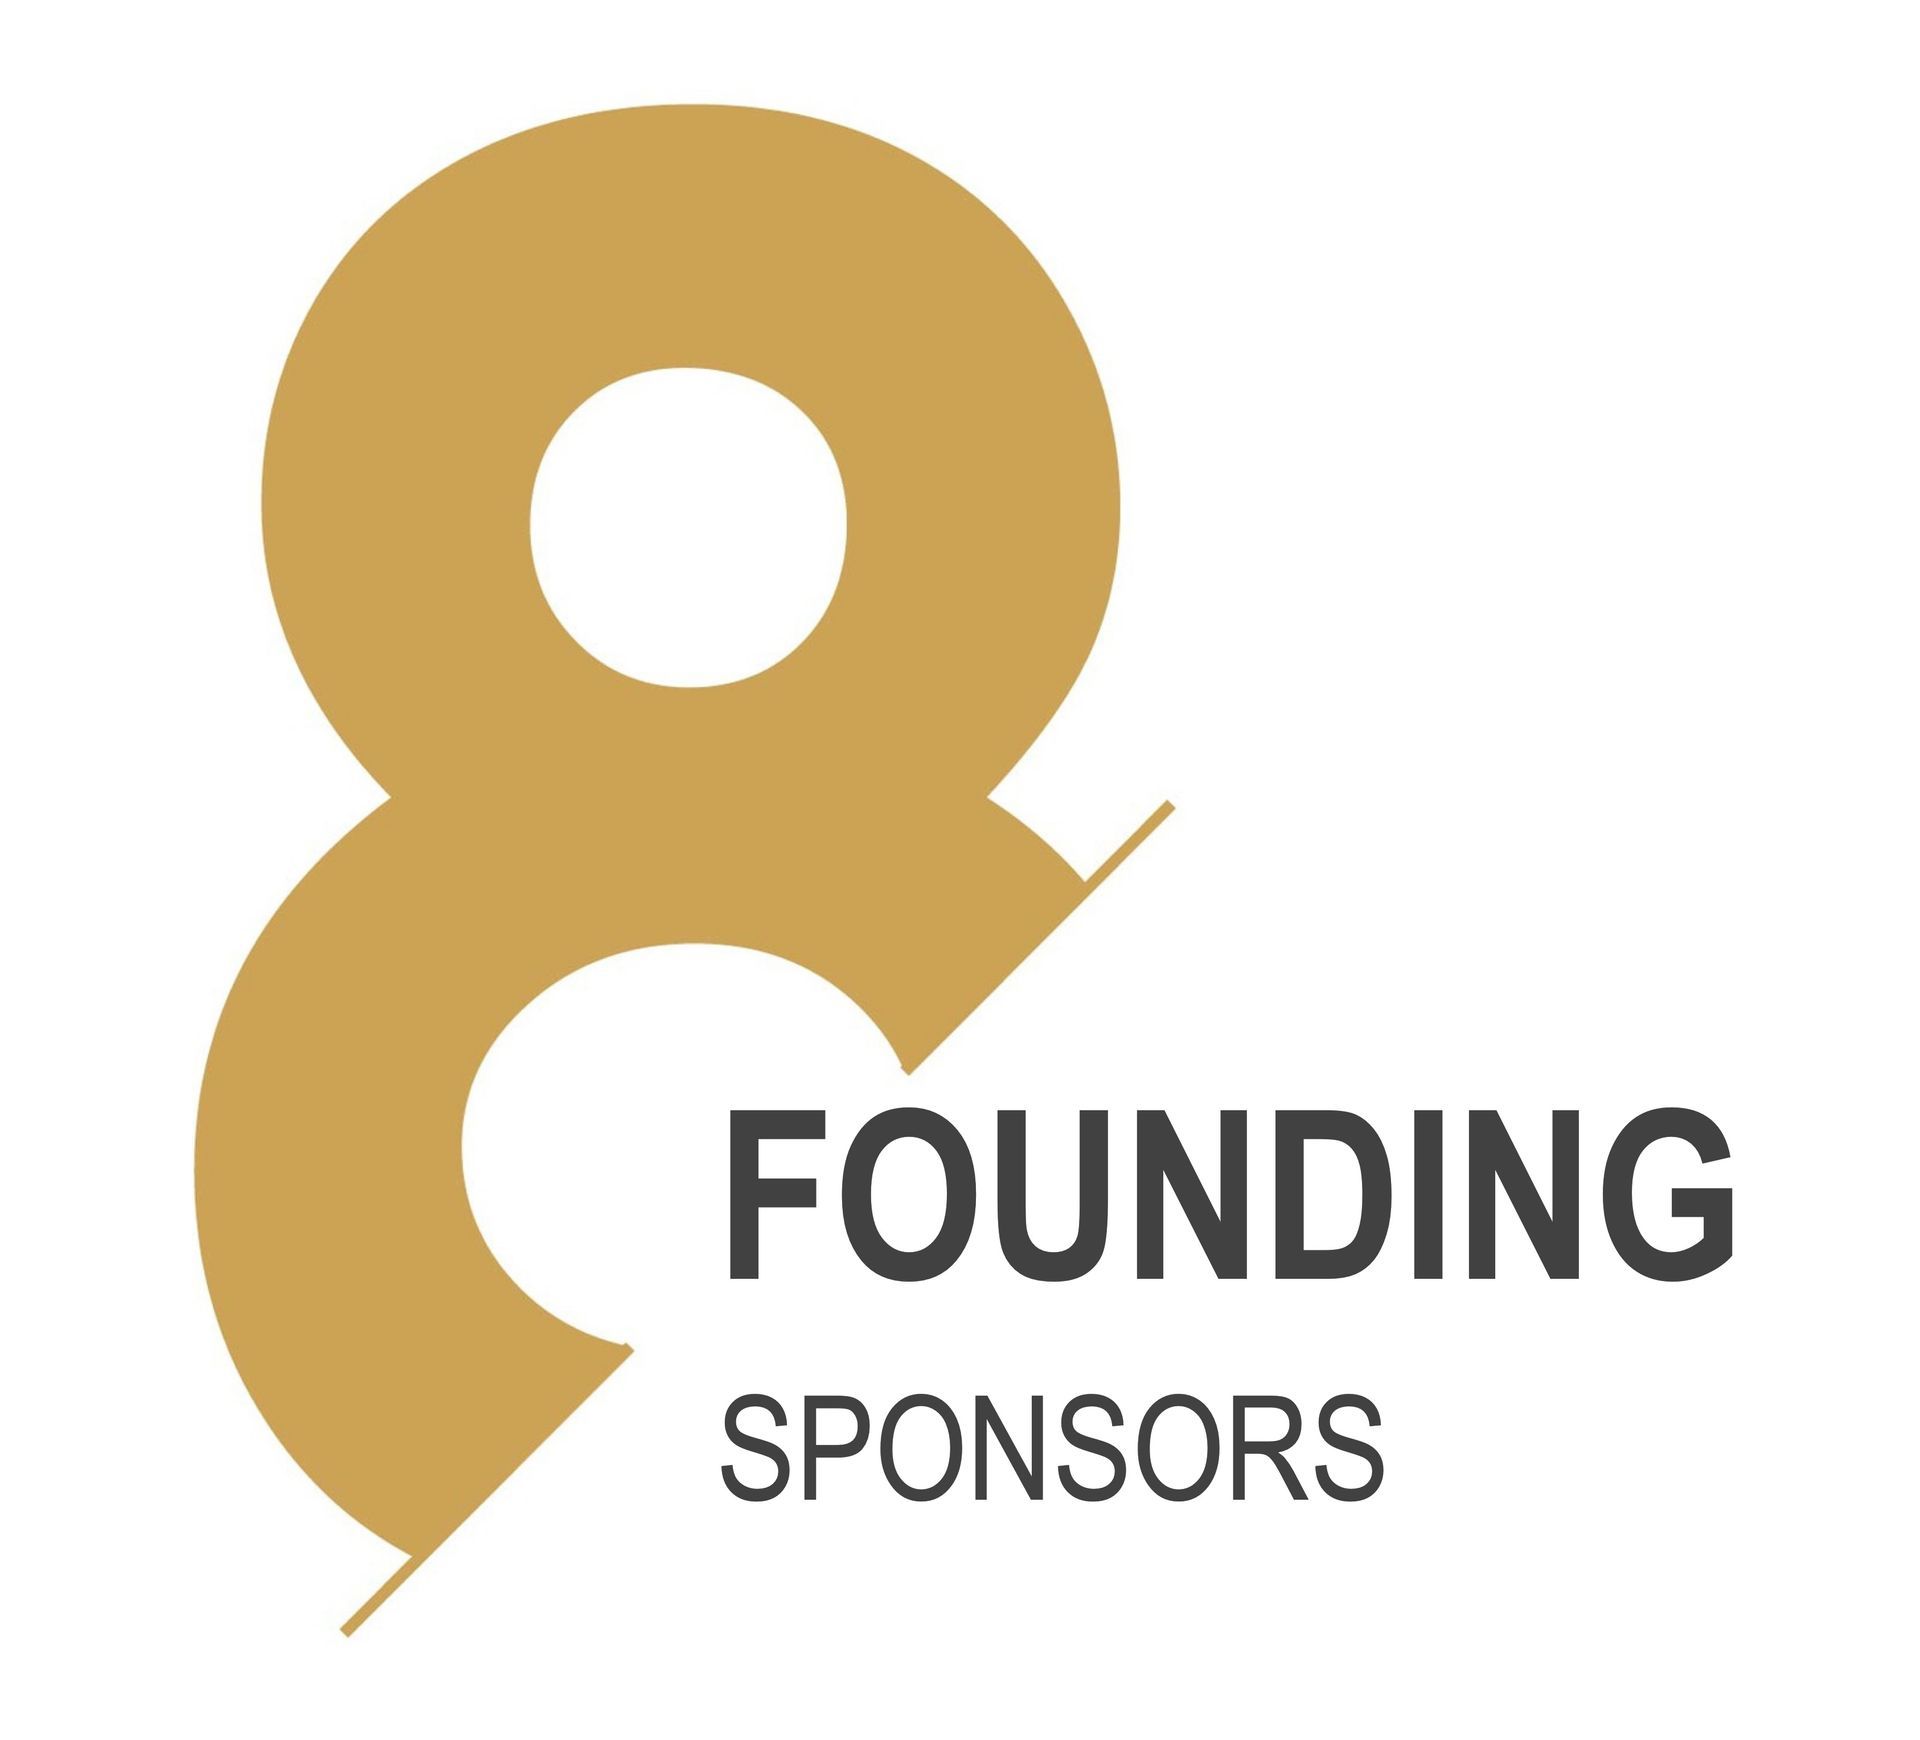 Founding Sponsors by Pippily